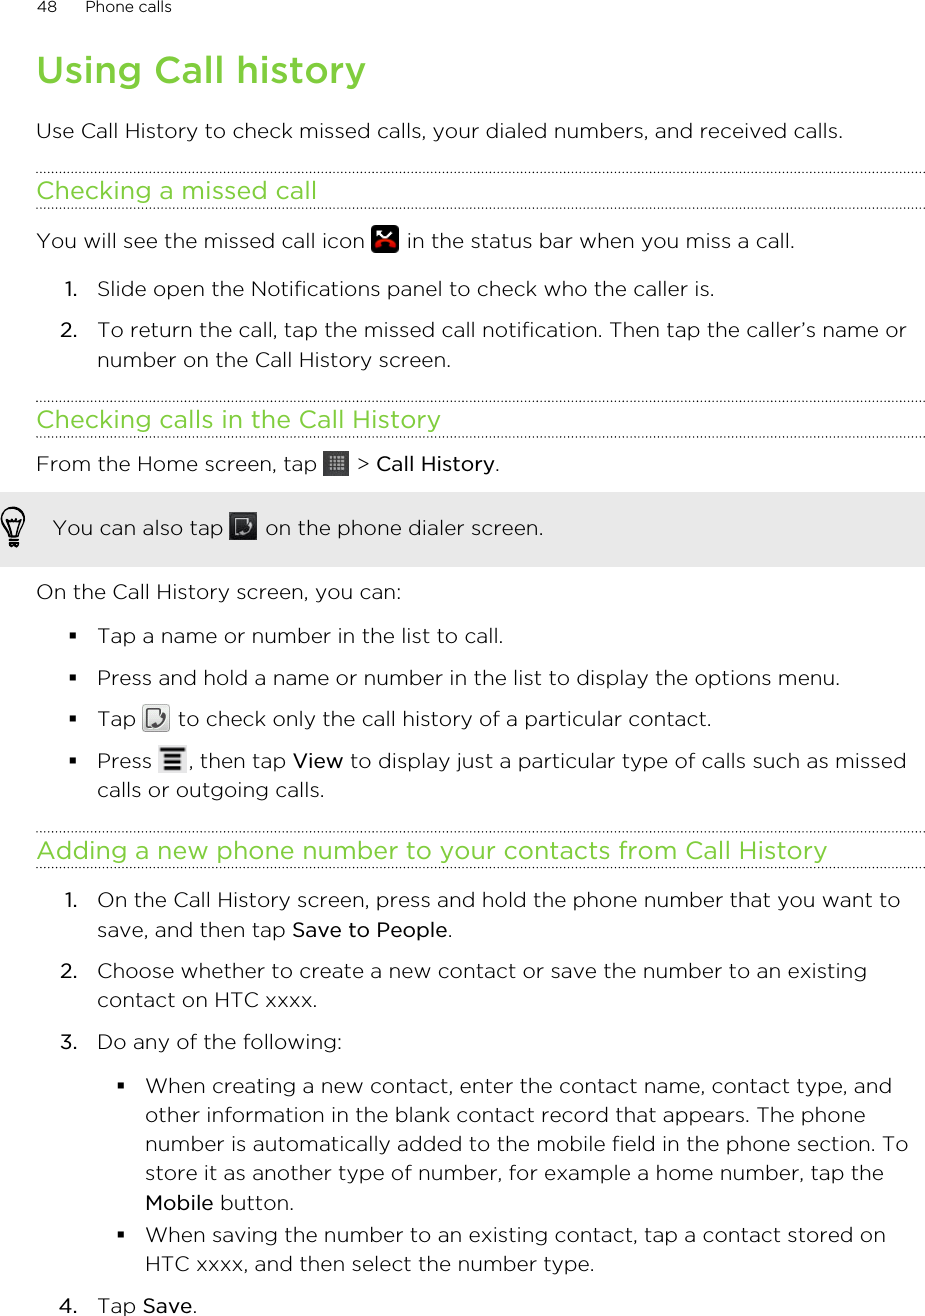 Using Call historyUse Call History to check missed calls, your dialed numbers, and received calls.Checking a missed callYou will see the missed call icon   in the status bar when you miss a call.1. Slide open the Notifications panel to check who the caller is.2. To return the call, tap the missed call notification. Then tap the caller’s name ornumber on the Call History screen.Checking calls in the Call HistoryFrom the Home screen, tap   &gt; Call History. You can also tap   on the phone dialer screen.On the Call History screen, you can:§Tap a name or number in the list to call.§Press and hold a name or number in the list to display the options menu.§Tap   to check only the call history of a particular contact.§Press  , then tap View to display just a particular type of calls such as missedcalls or outgoing calls.Adding a new phone number to your contacts from Call History1. On the Call History screen, press and hold the phone number that you want tosave, and then tap Save to People.2. Choose whether to create a new contact or save the number to an existingcontact on HTC xxxx.3. Do any of the following:§When creating a new contact, enter the contact name, contact type, andother information in the blank contact record that appears. The phonenumber is automatically added to the mobile field in the phone section. Tostore it as another type of number, for example a home number, tap theMobile button.§When saving the number to an existing contact, tap a contact stored onHTC xxxx, and then select the number type.4. Tap Save.48 Phone calls